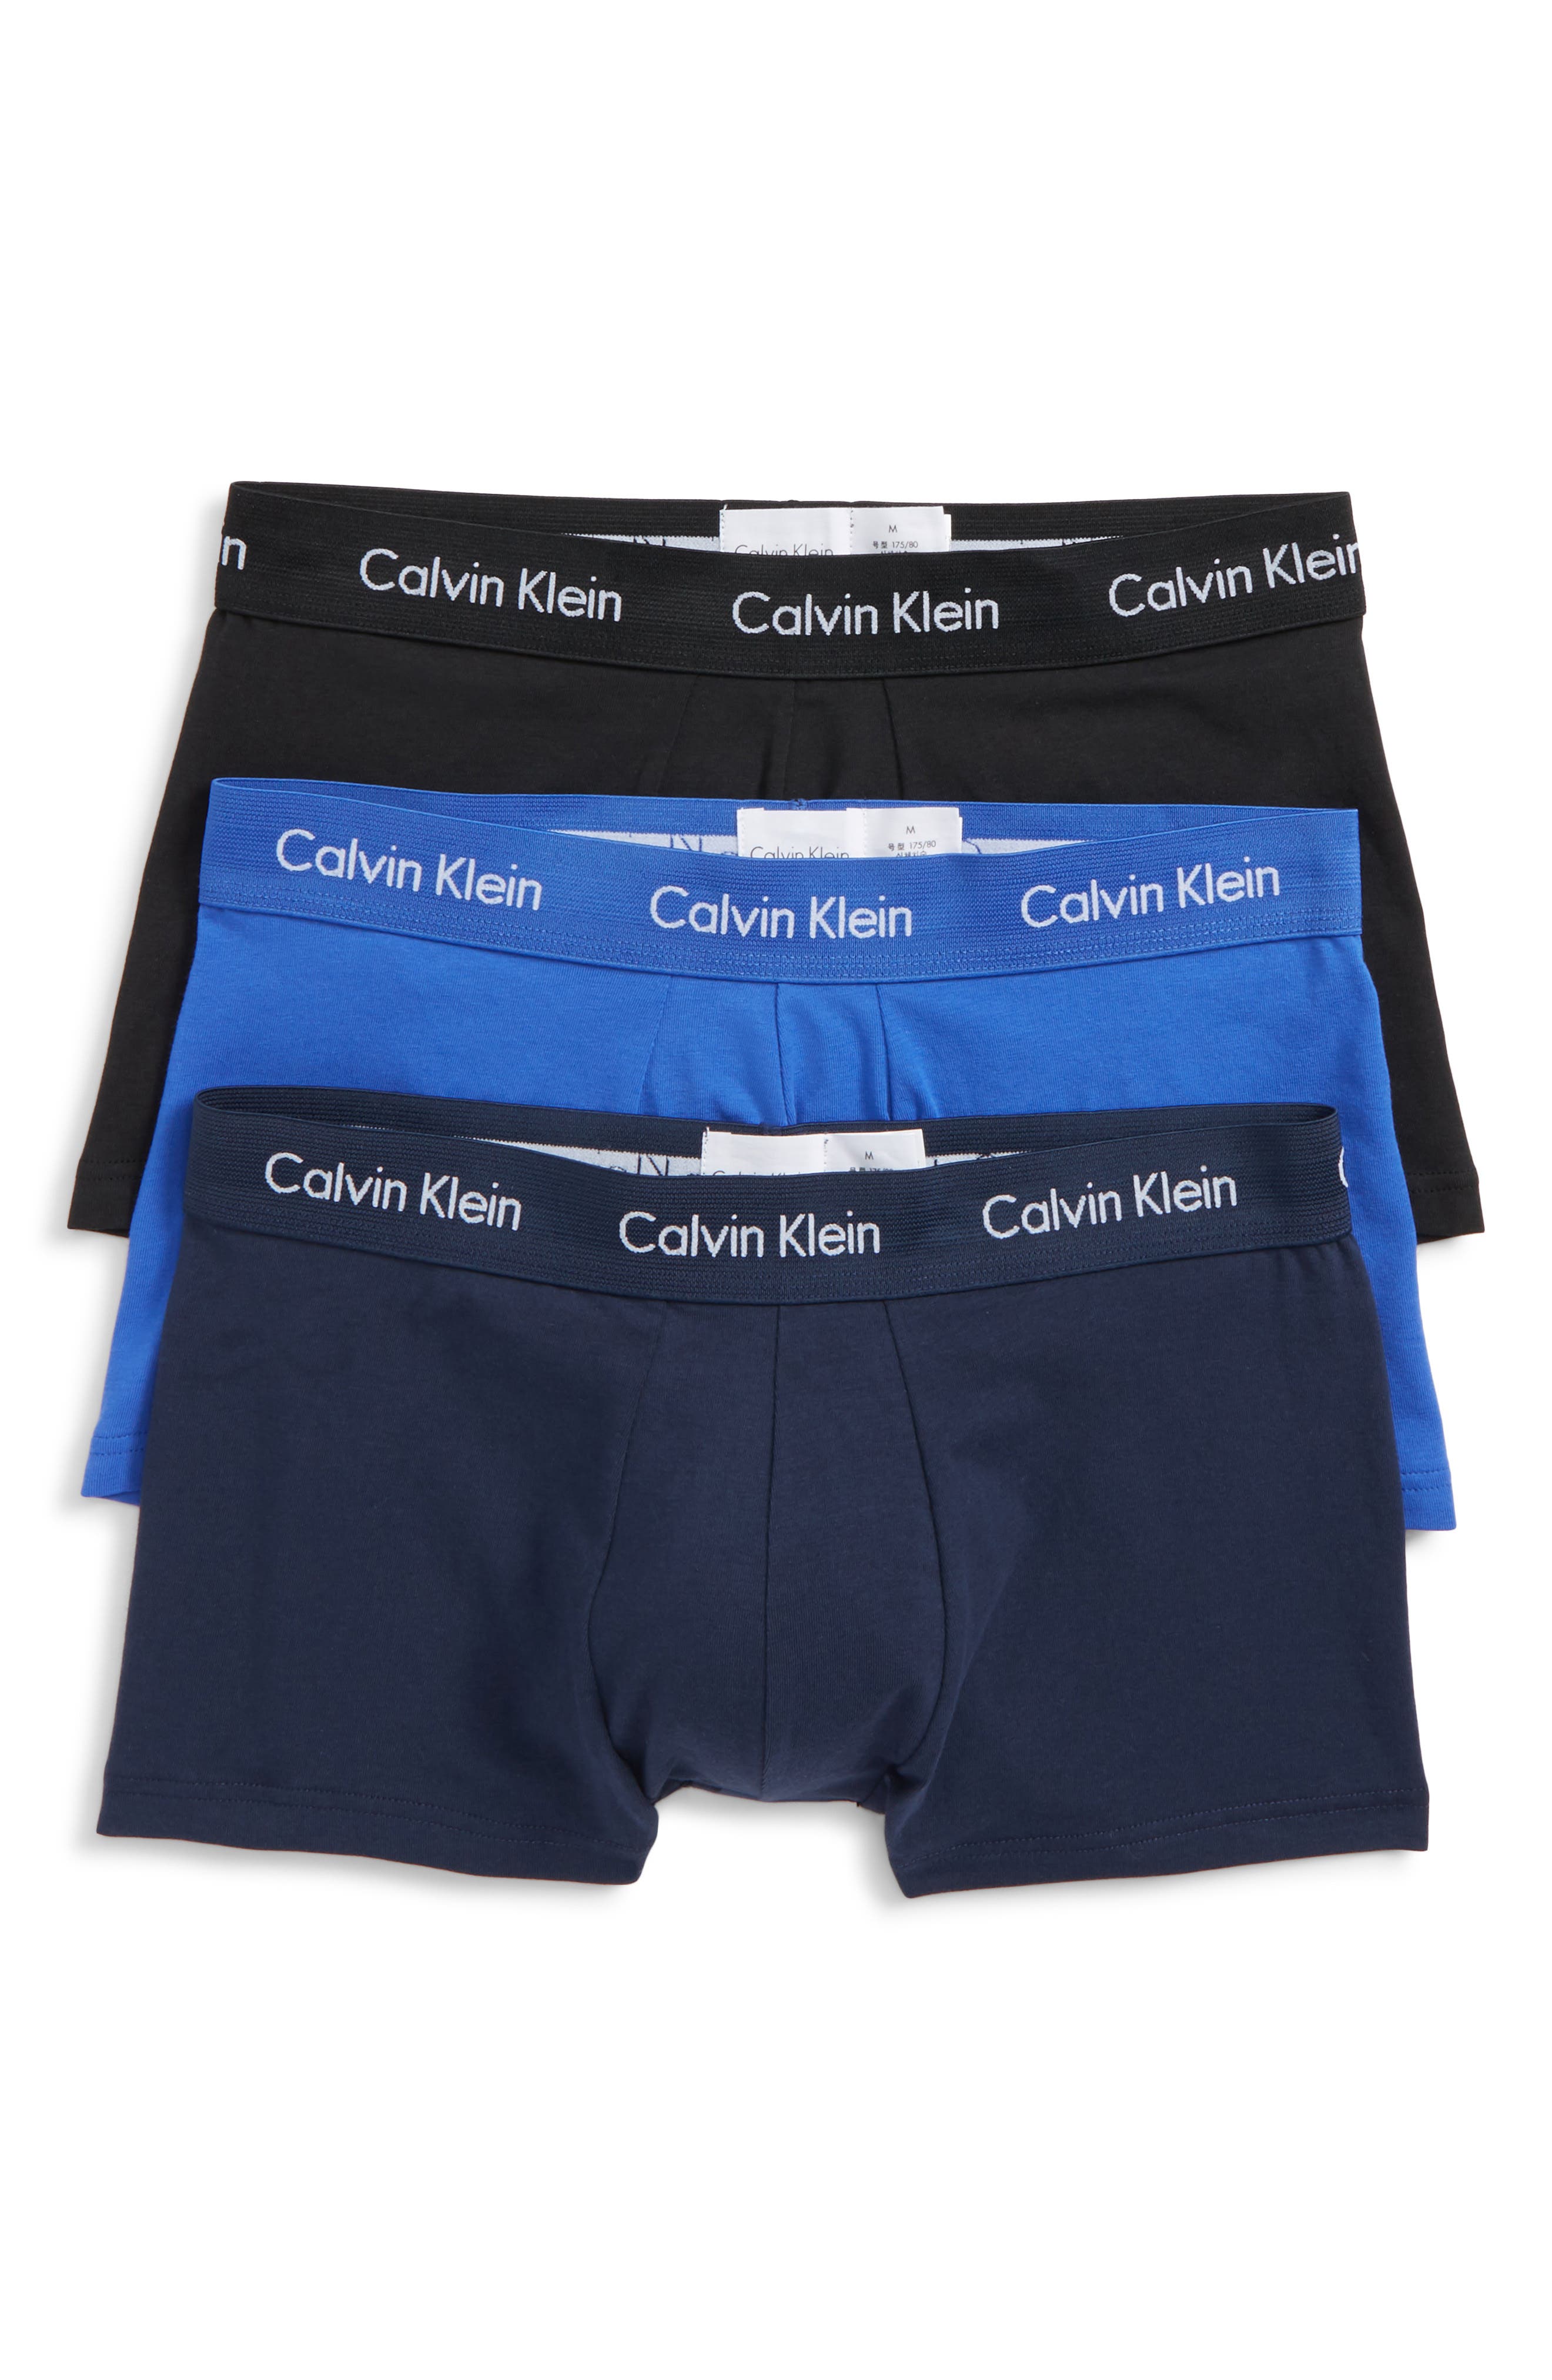 UPC 011531179905 product image for Men's Calvin Klein 3-Pack Stretch Cotton Low Rise Trunks, Size Small - Blue | upcitemdb.com